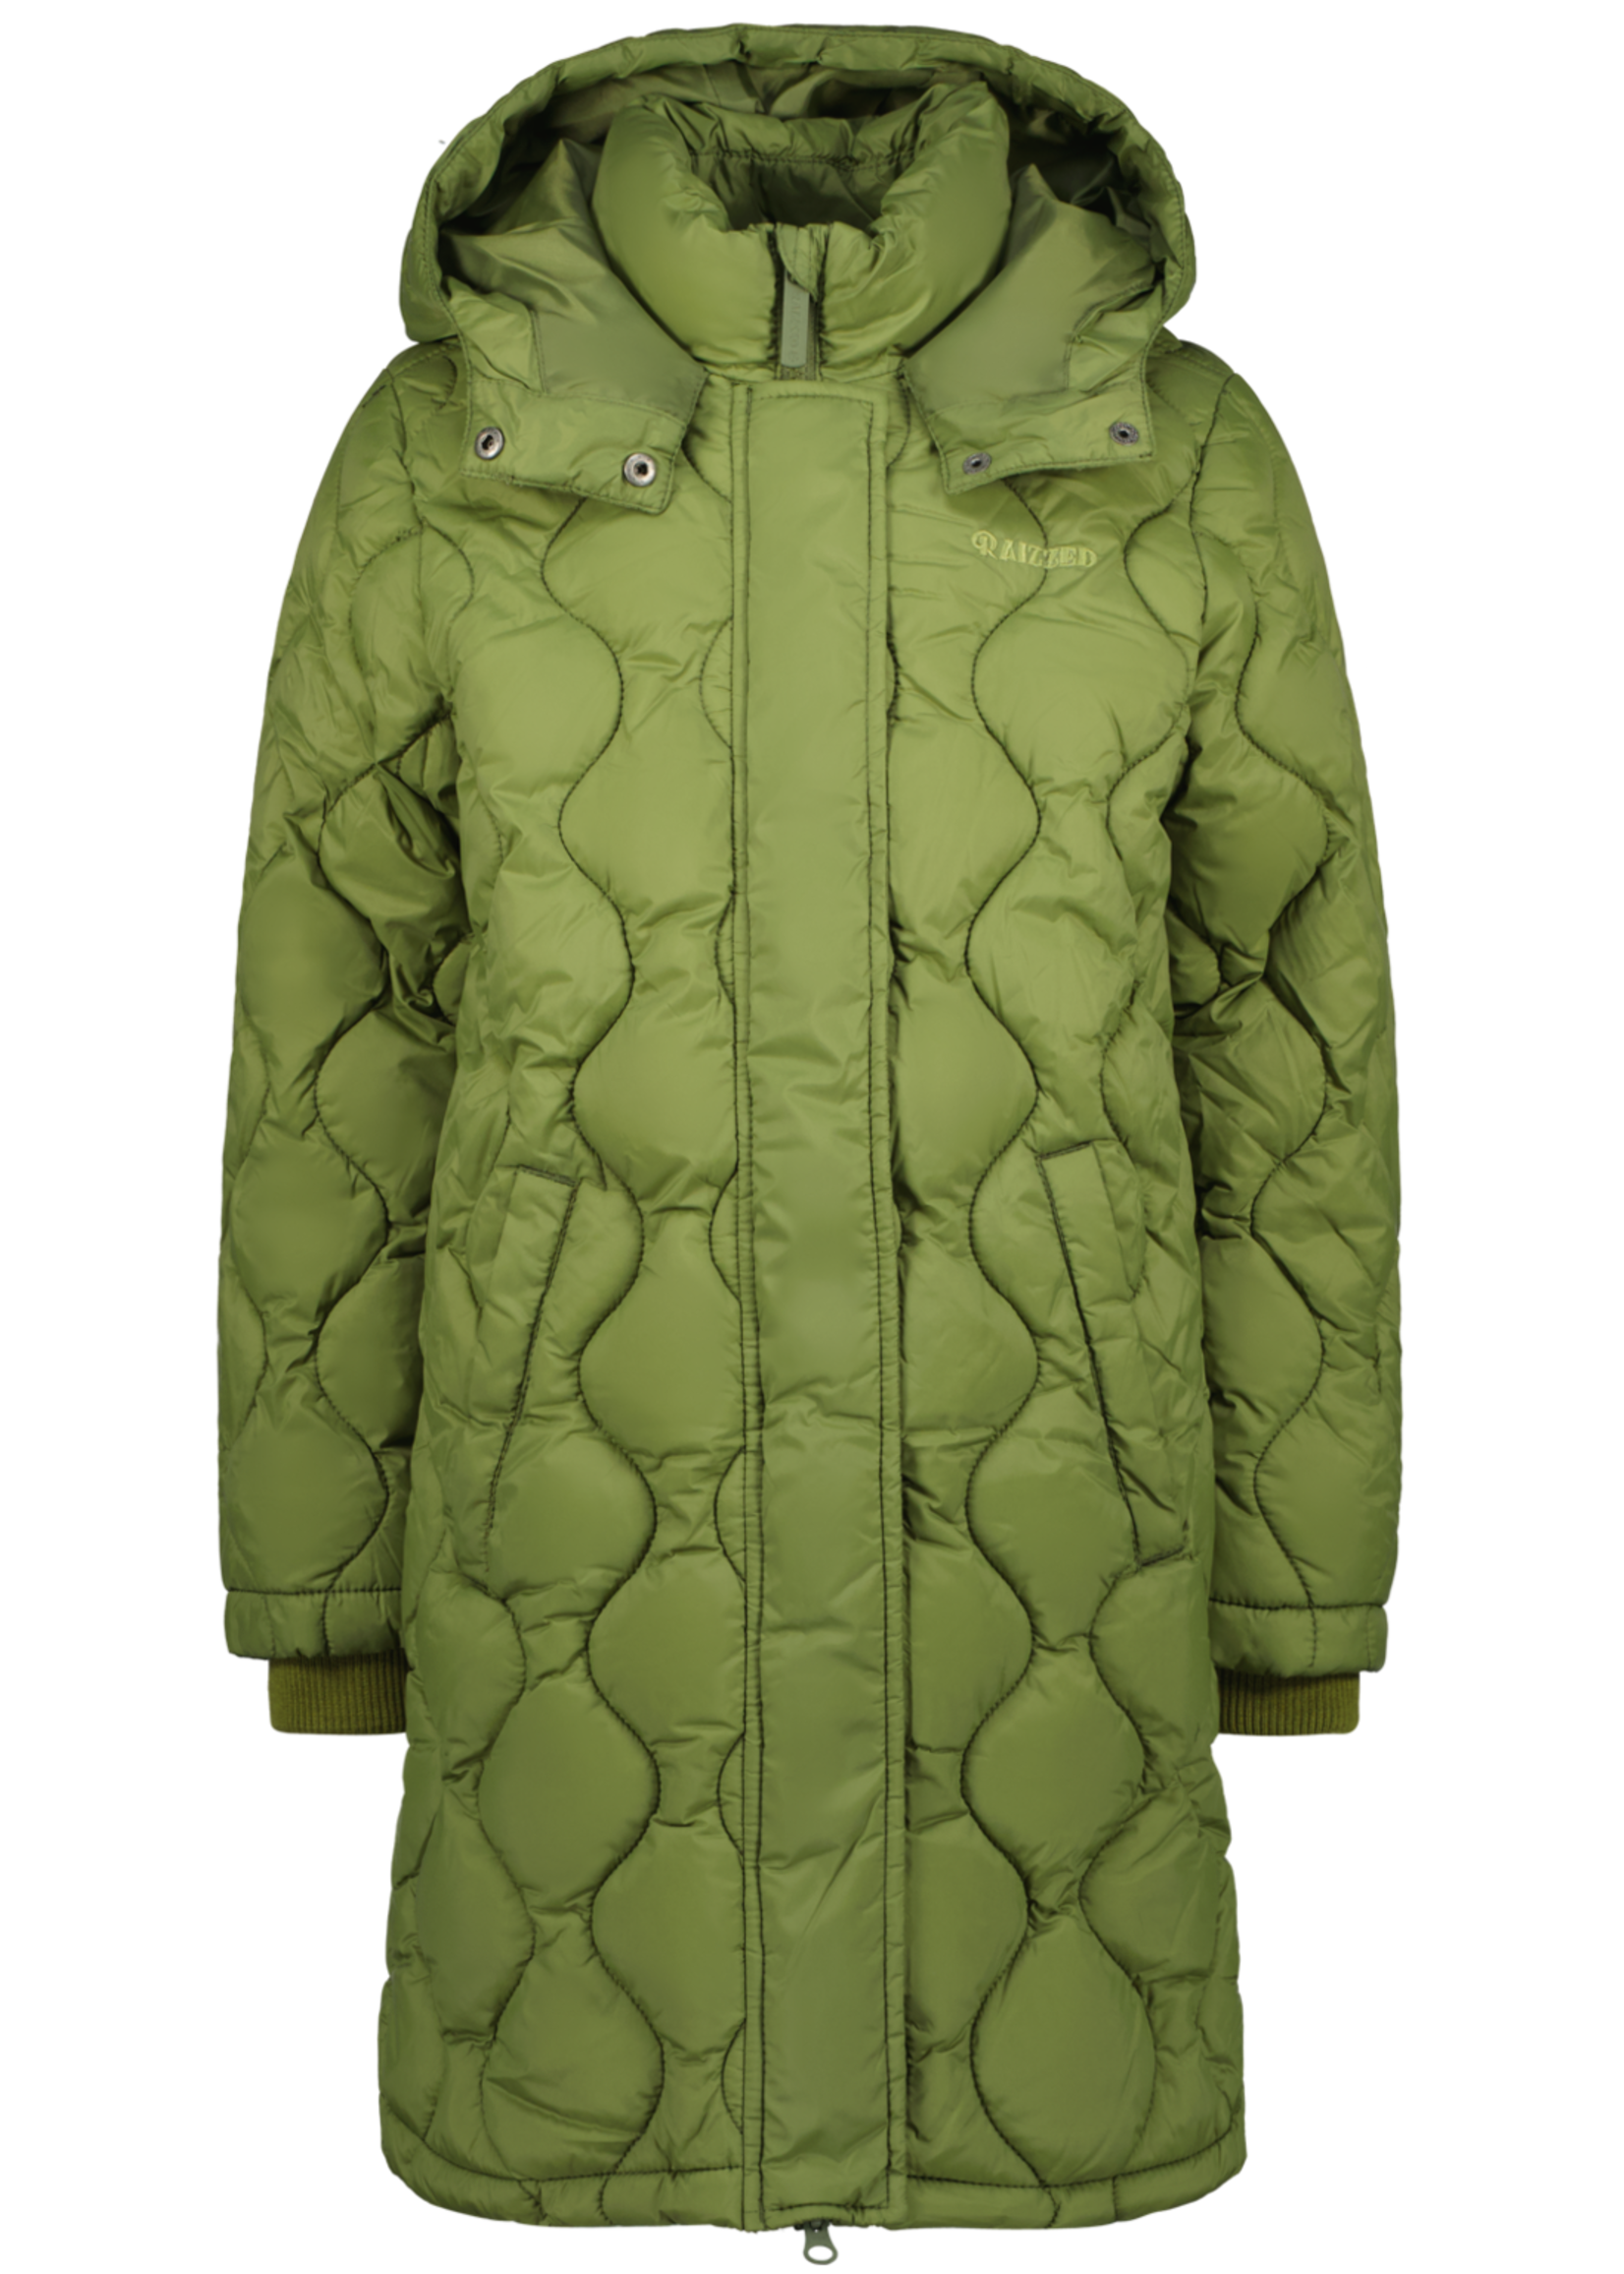 Ontario coat - Forest olive